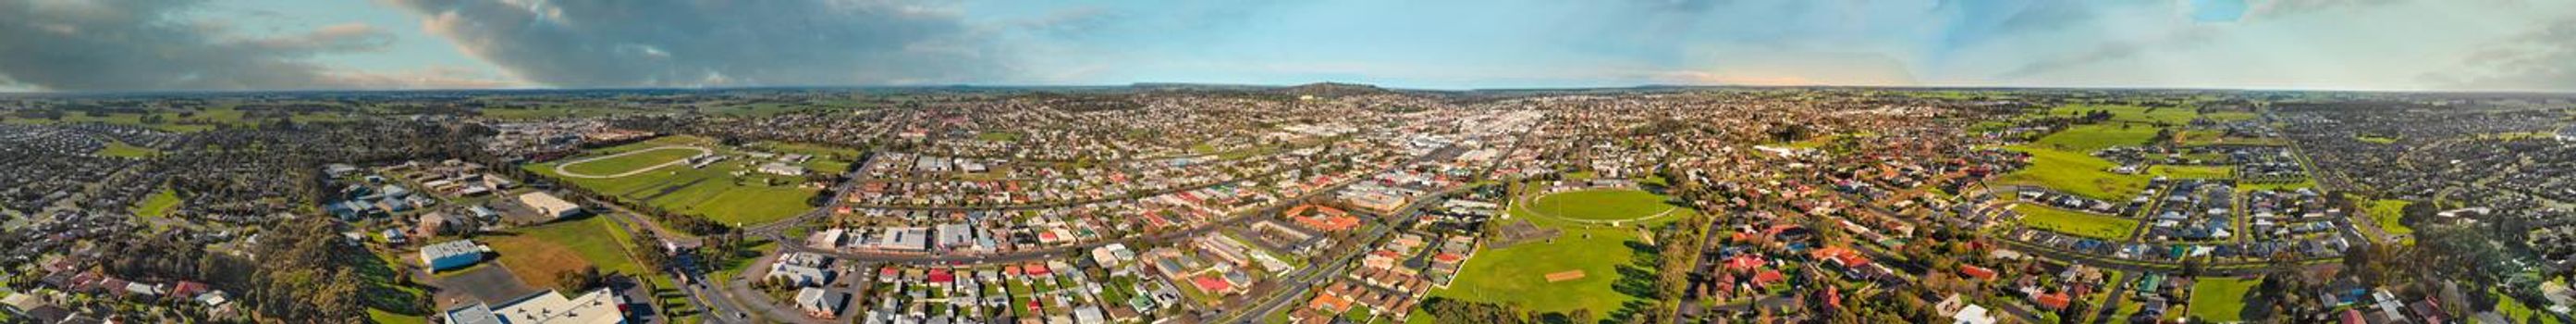 Panoramic aerial view of Mt Gambier skyline on a beautiful day, Australia.